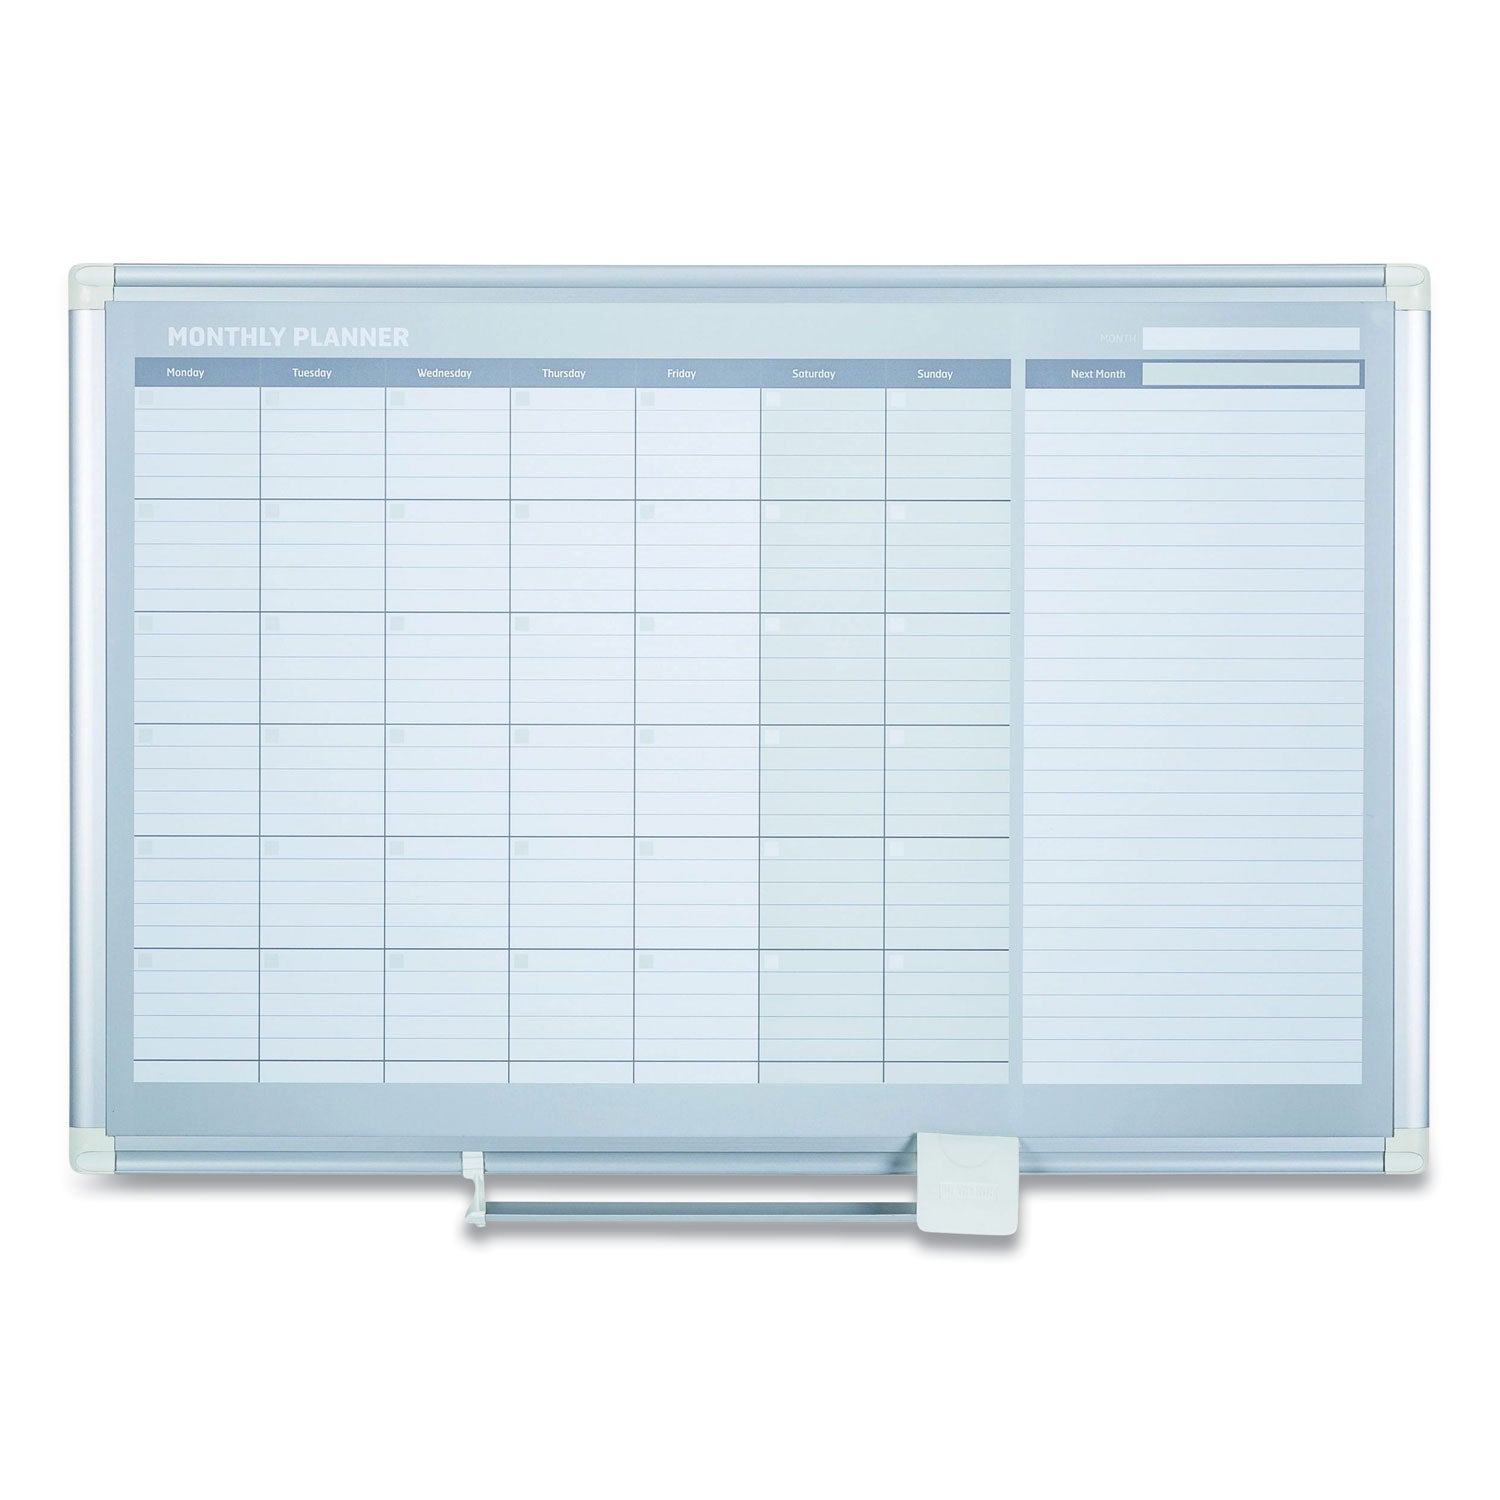 Magnetic Dry Erase Calendar Board, One Month, 48 x 36, White Surface, Silver Aluminum Frame - 